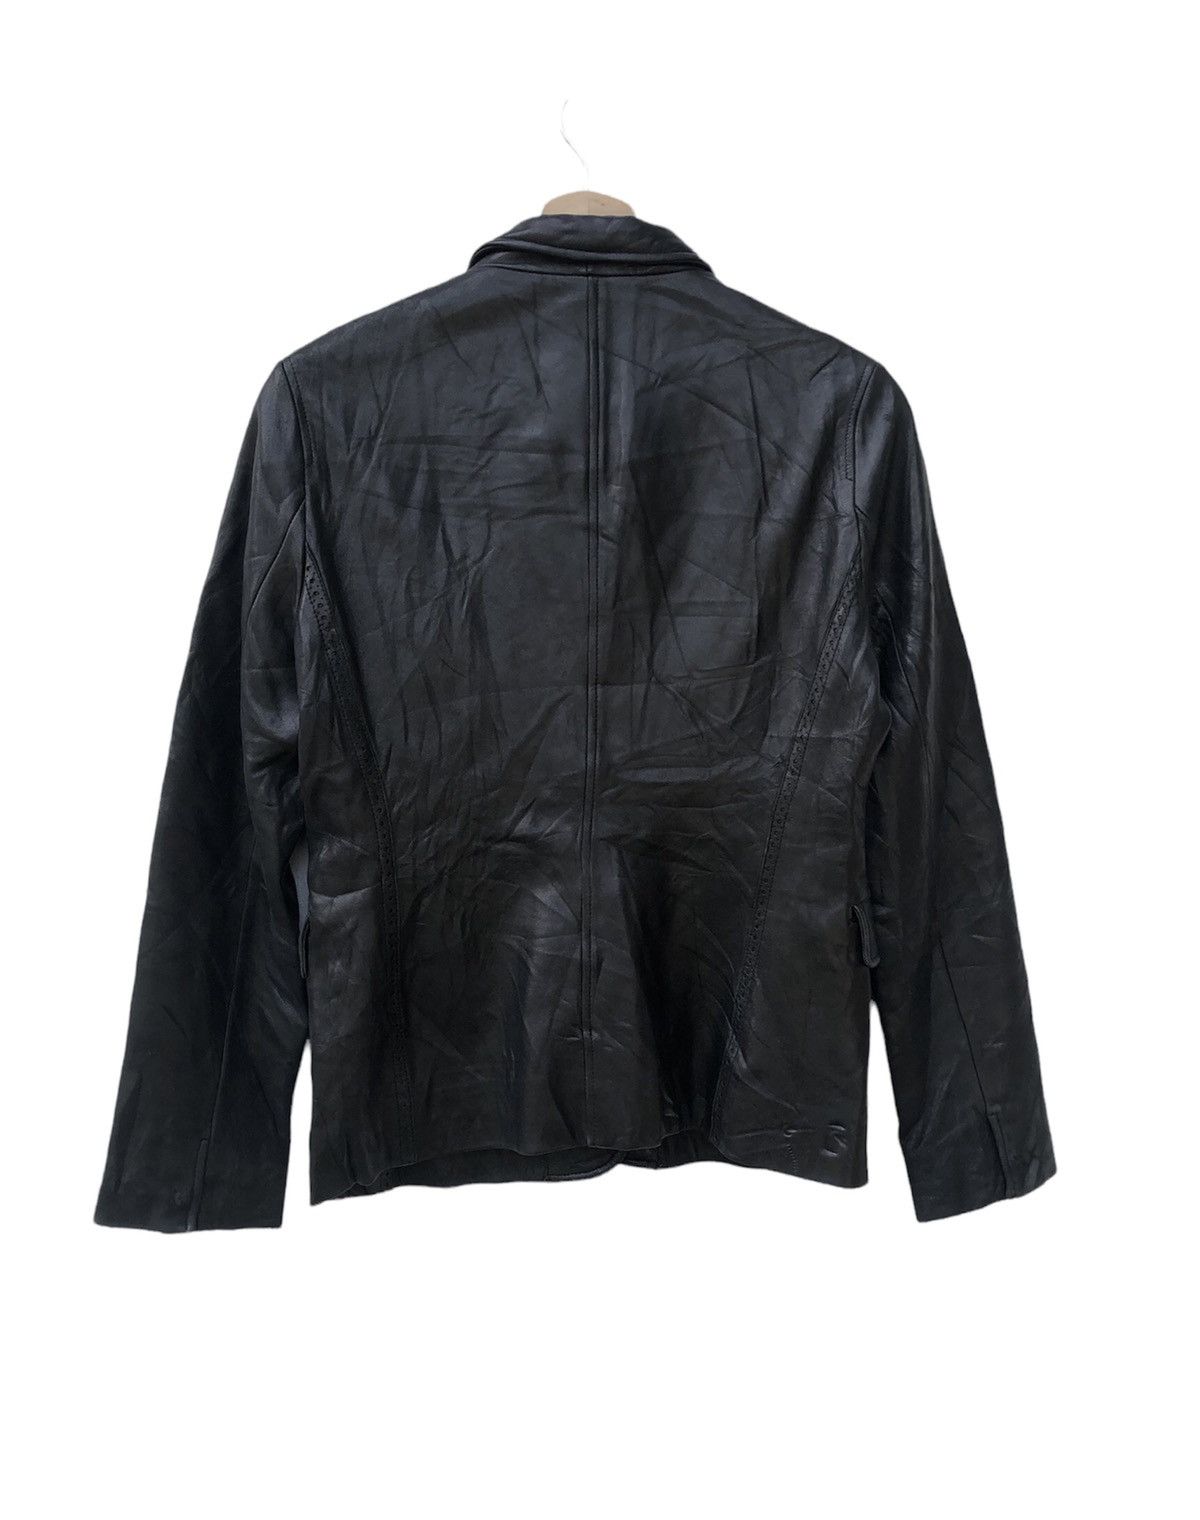 Comme Ca Ism Leather Jacket - 2